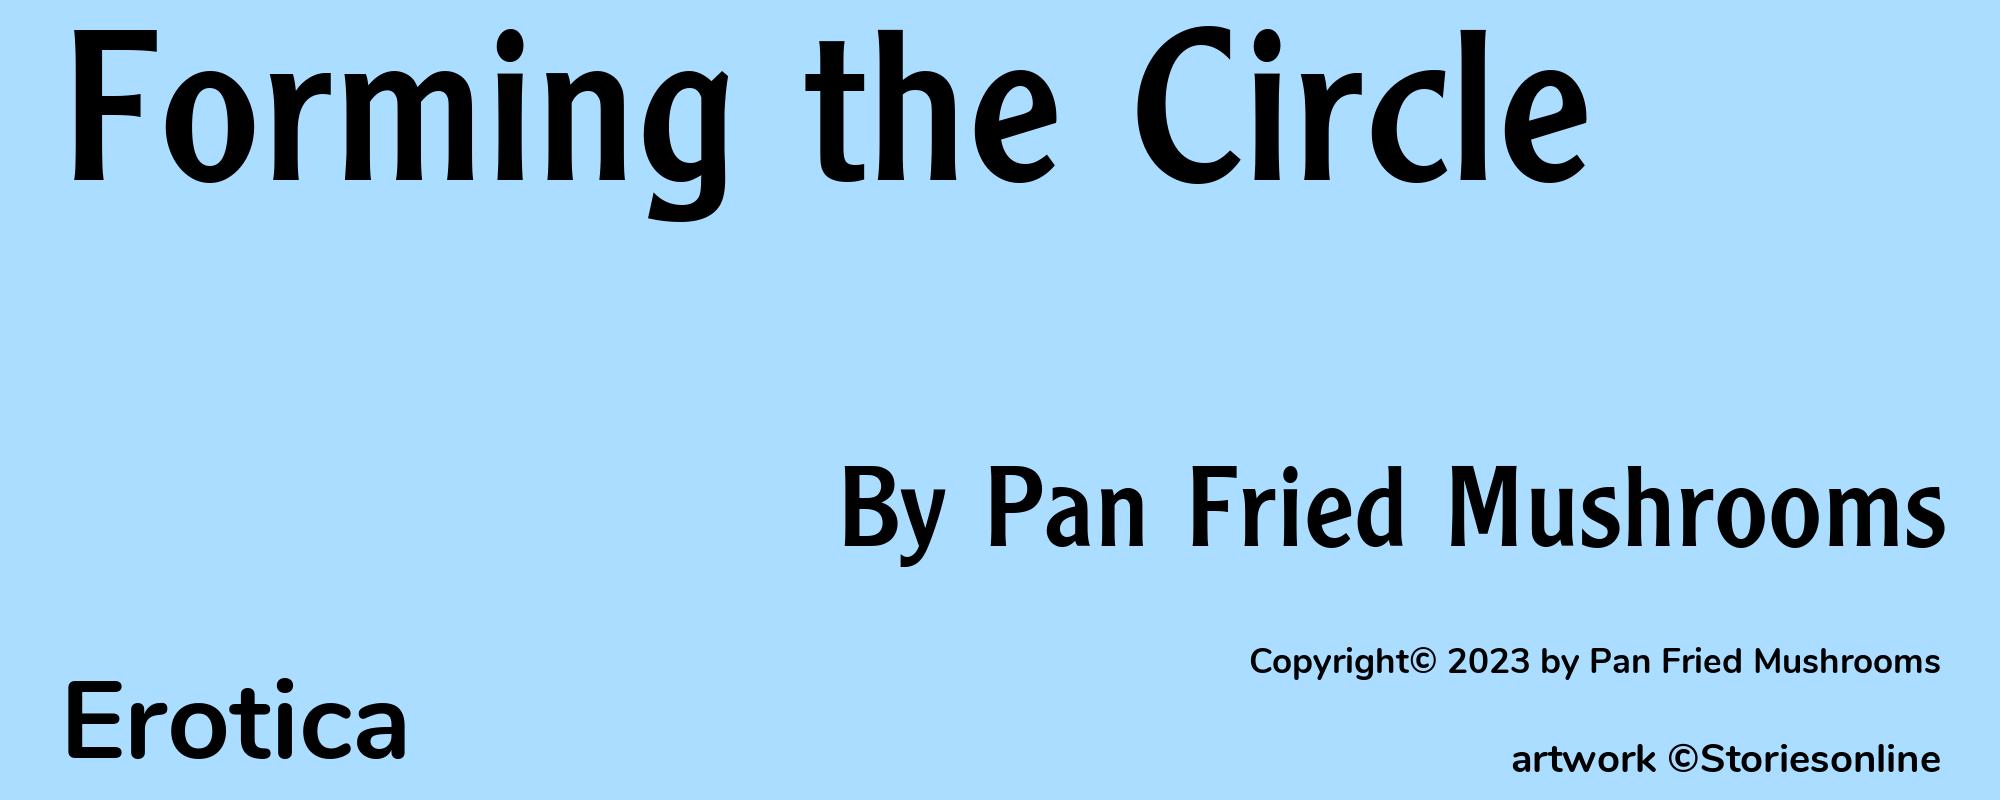 Forming the Circle - Cover